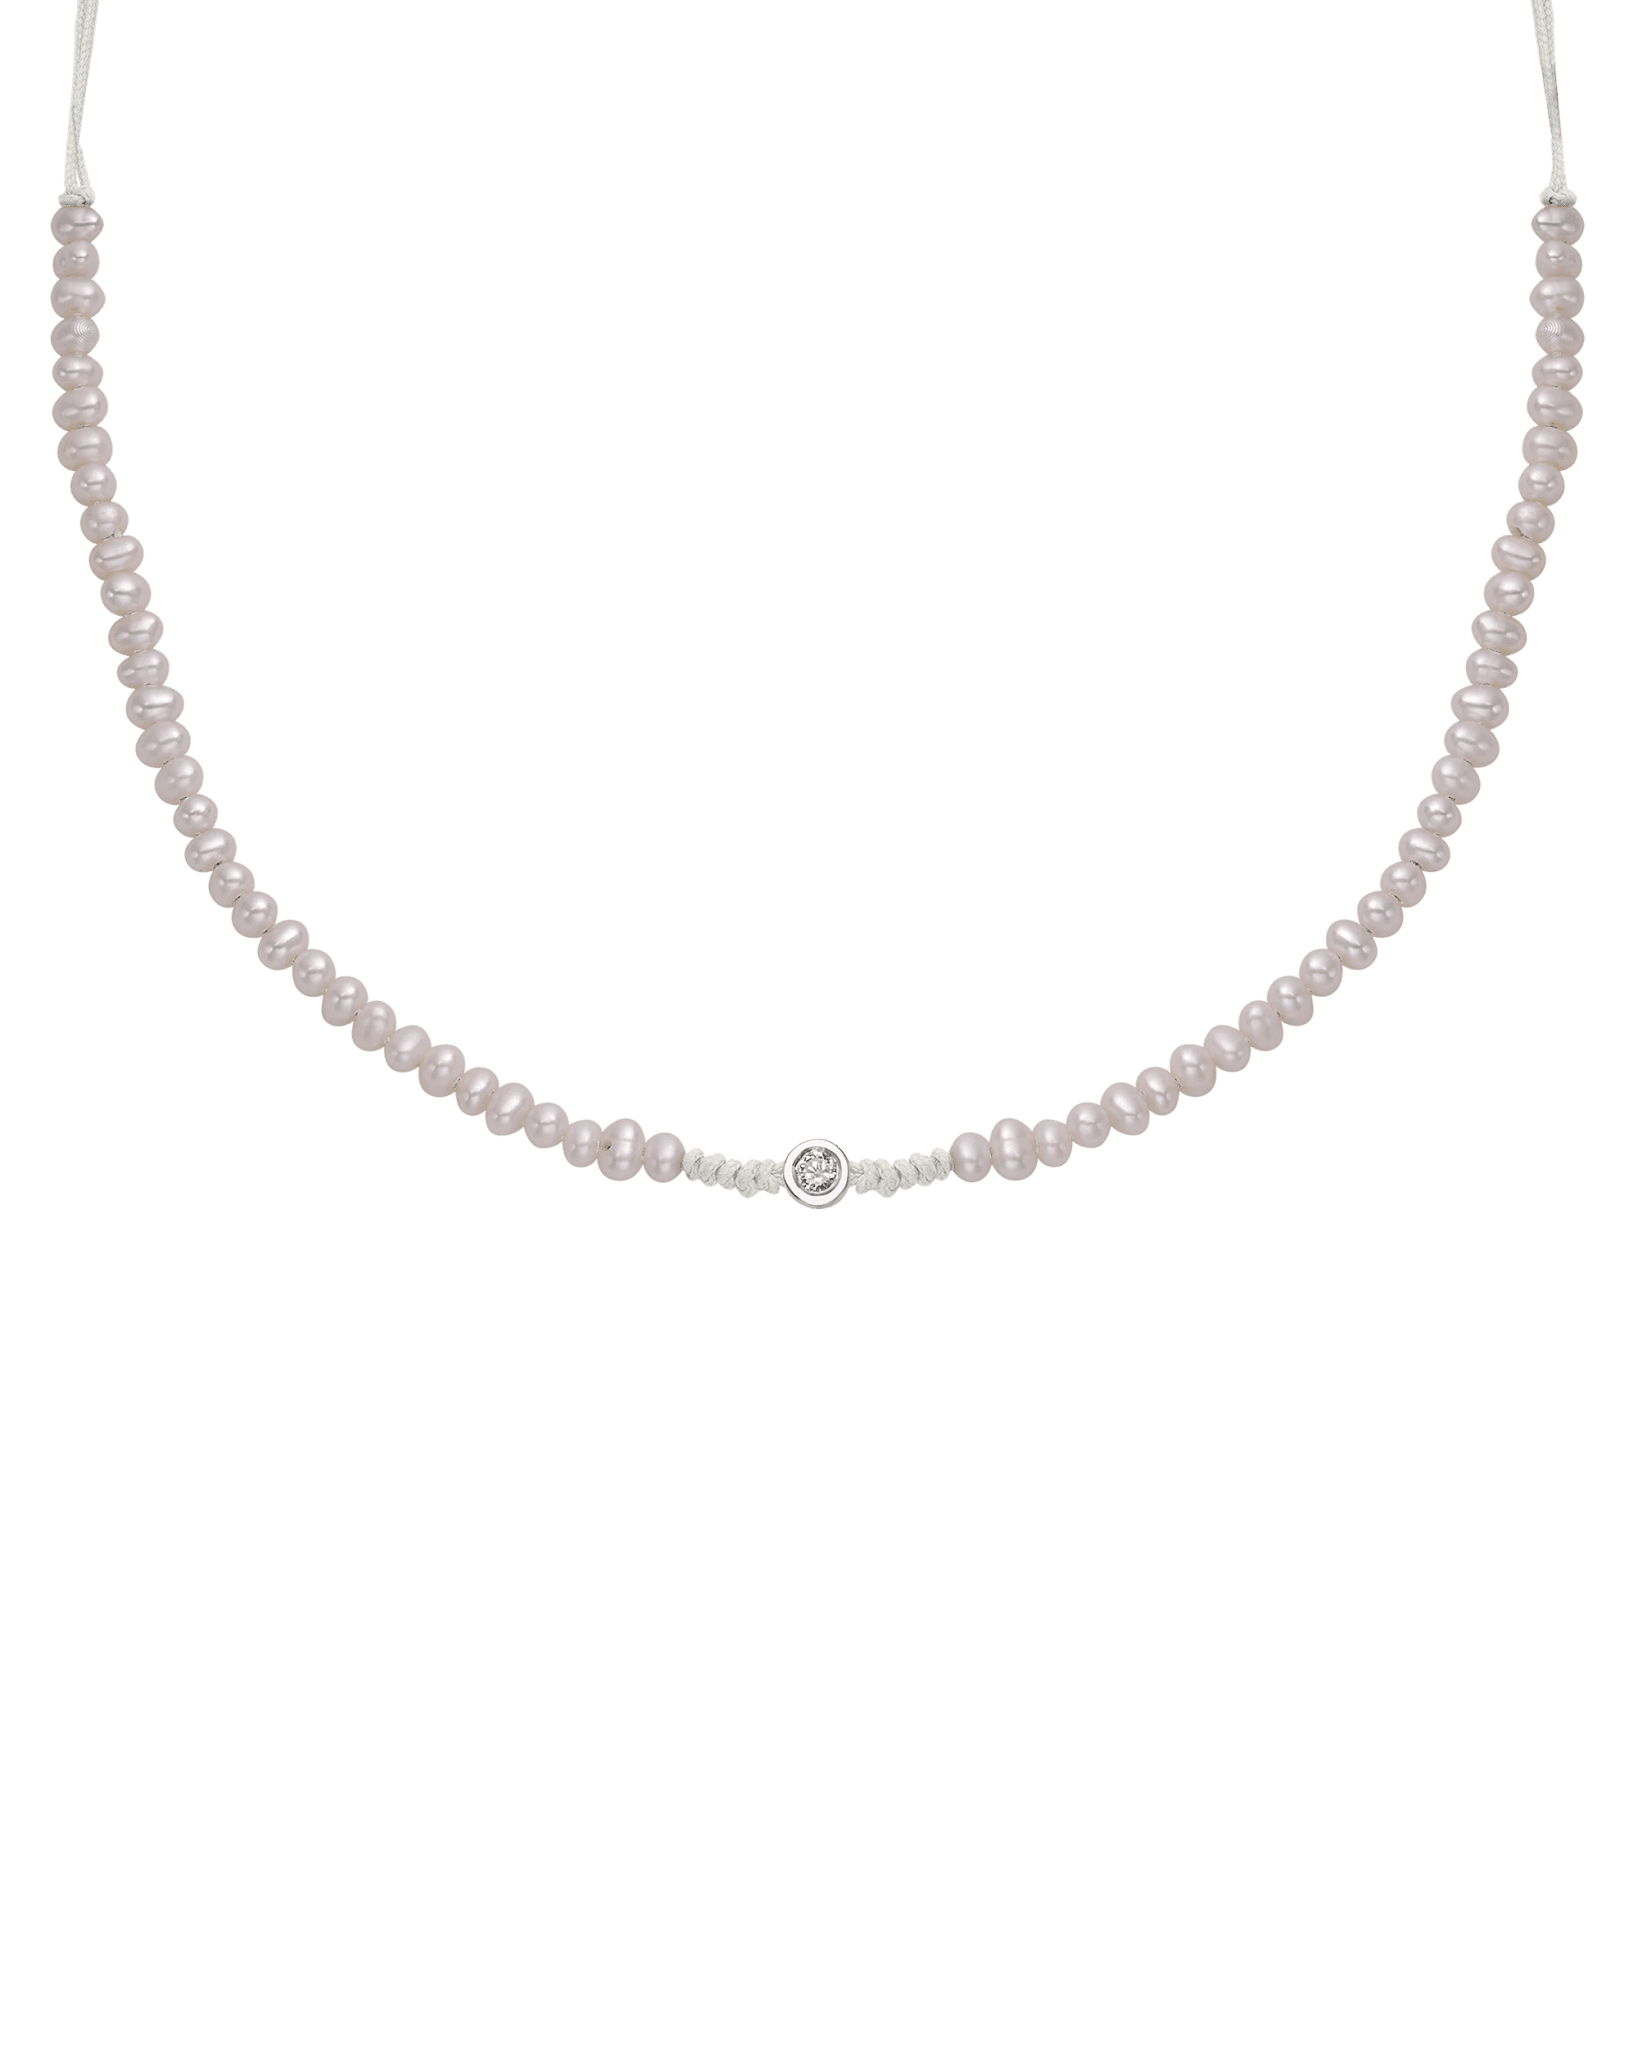 Collier String of Love Perles Naturelles - Or Blanc 14 carats Necklaces 14K Solid Gold Perle Medium: 0.05 carats 